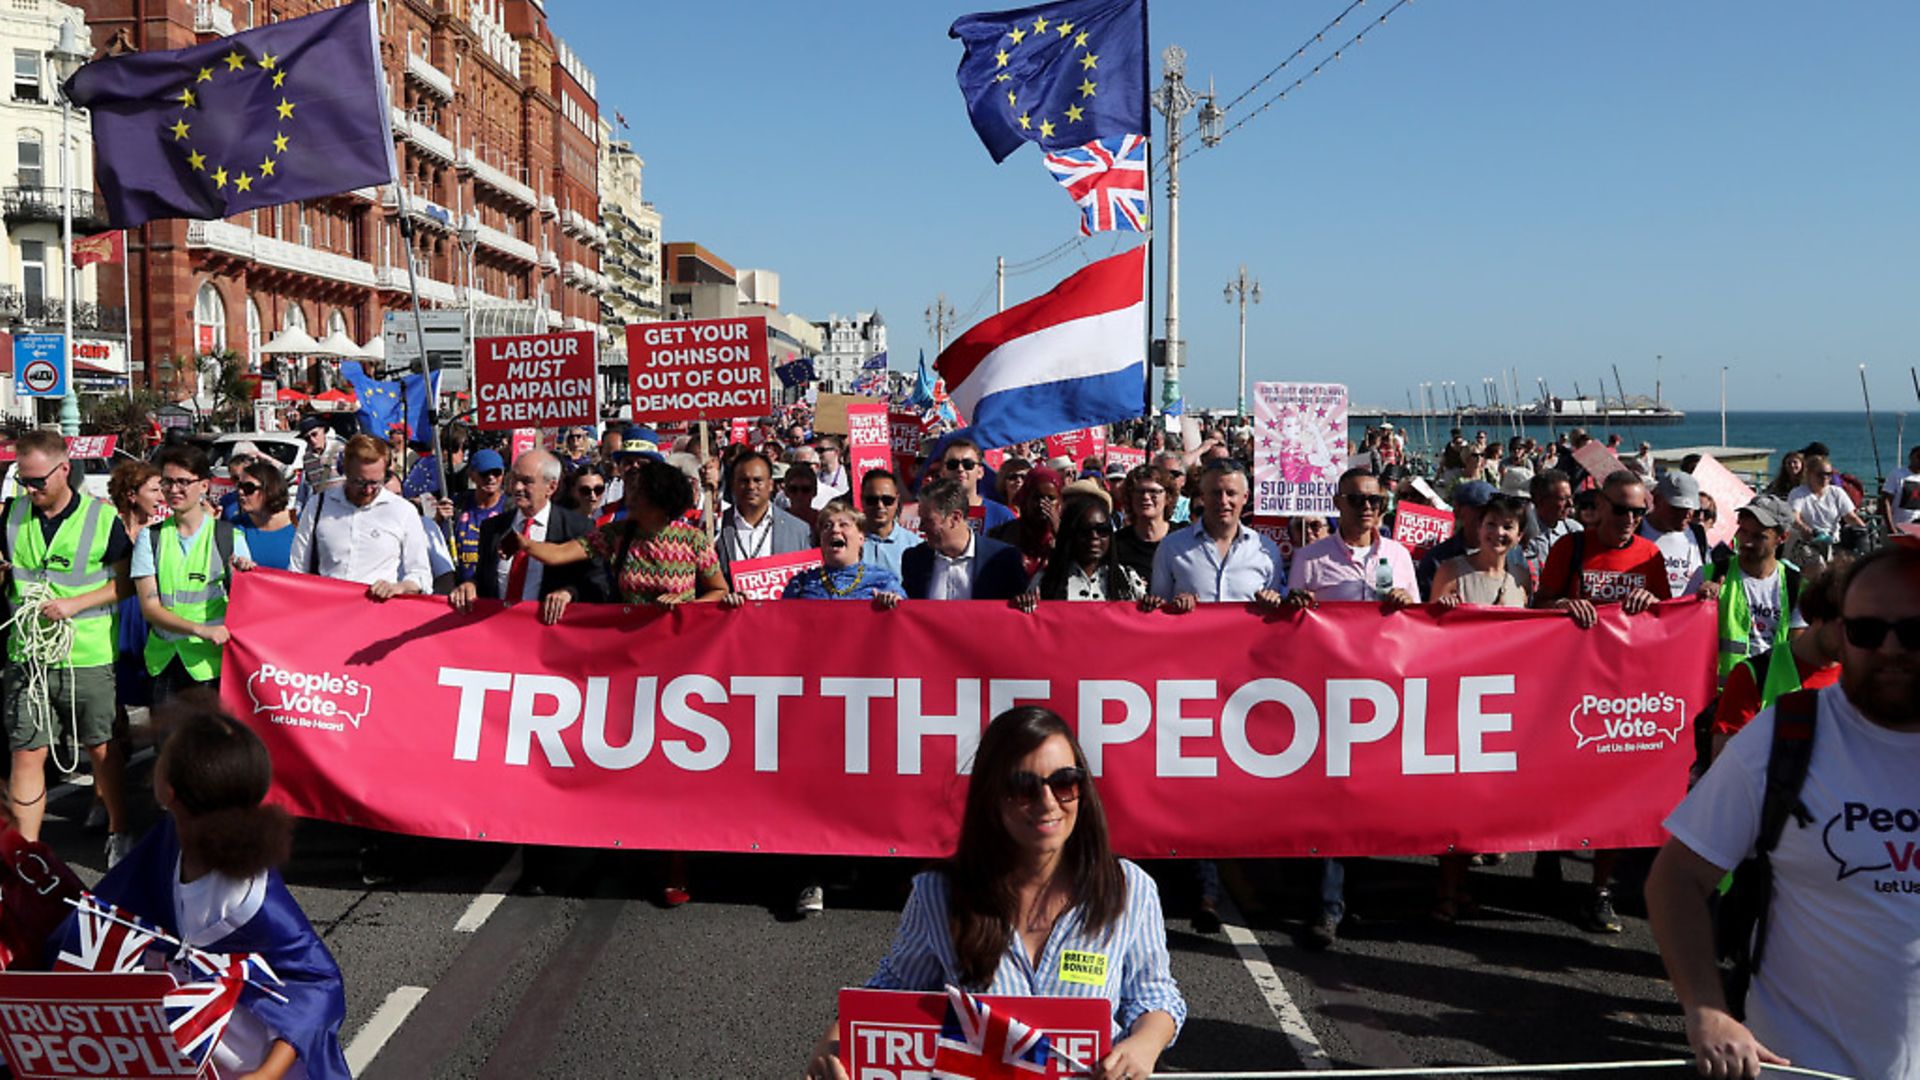 "It'�ll be the last big rallying cry for people to vote tactically to prevent a Johnson landslide",� said Francis Grove-White. Photo: Gareth Fuller / PA - Credit: PA Wire/PA Images